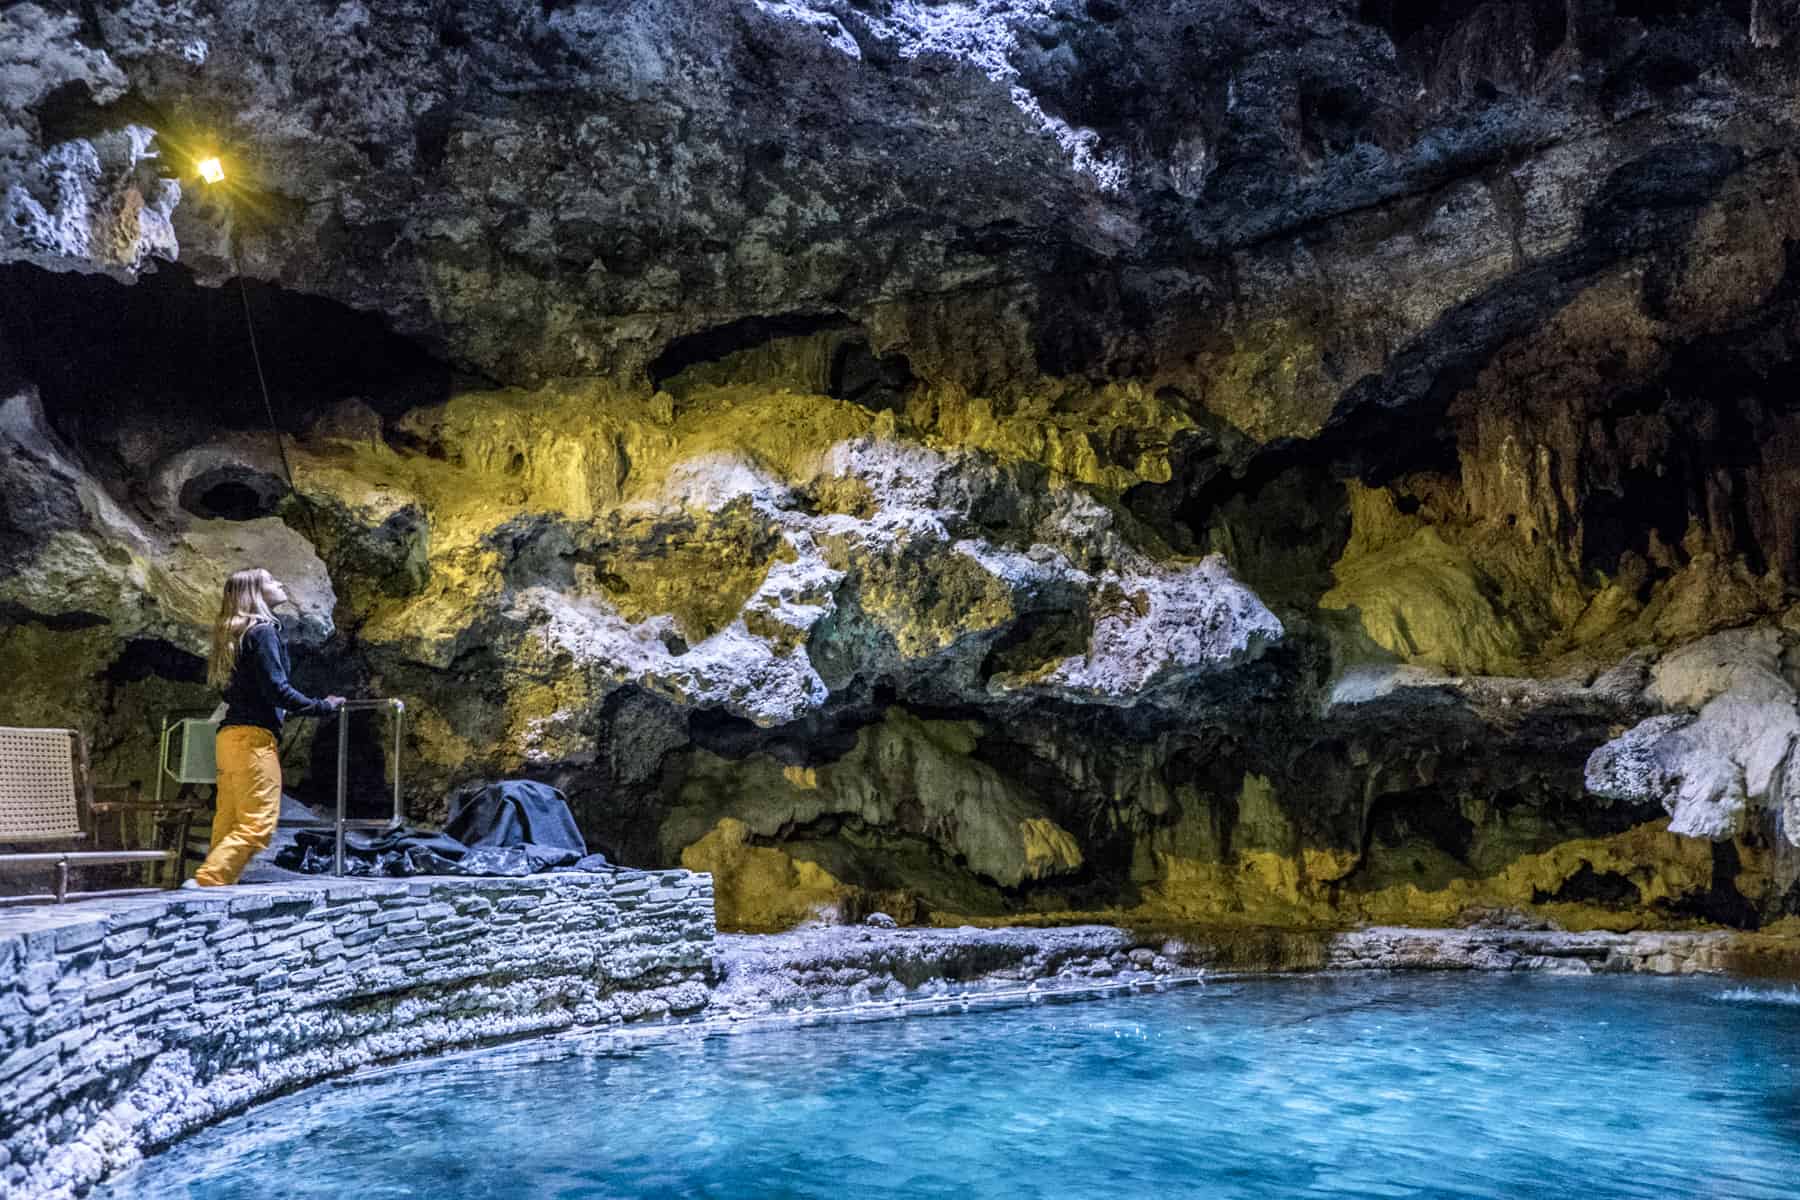 A woman in a black top and yellow trousers looks up towards the ceiling of a cave in Banff filled with a basin of bright blue water. 